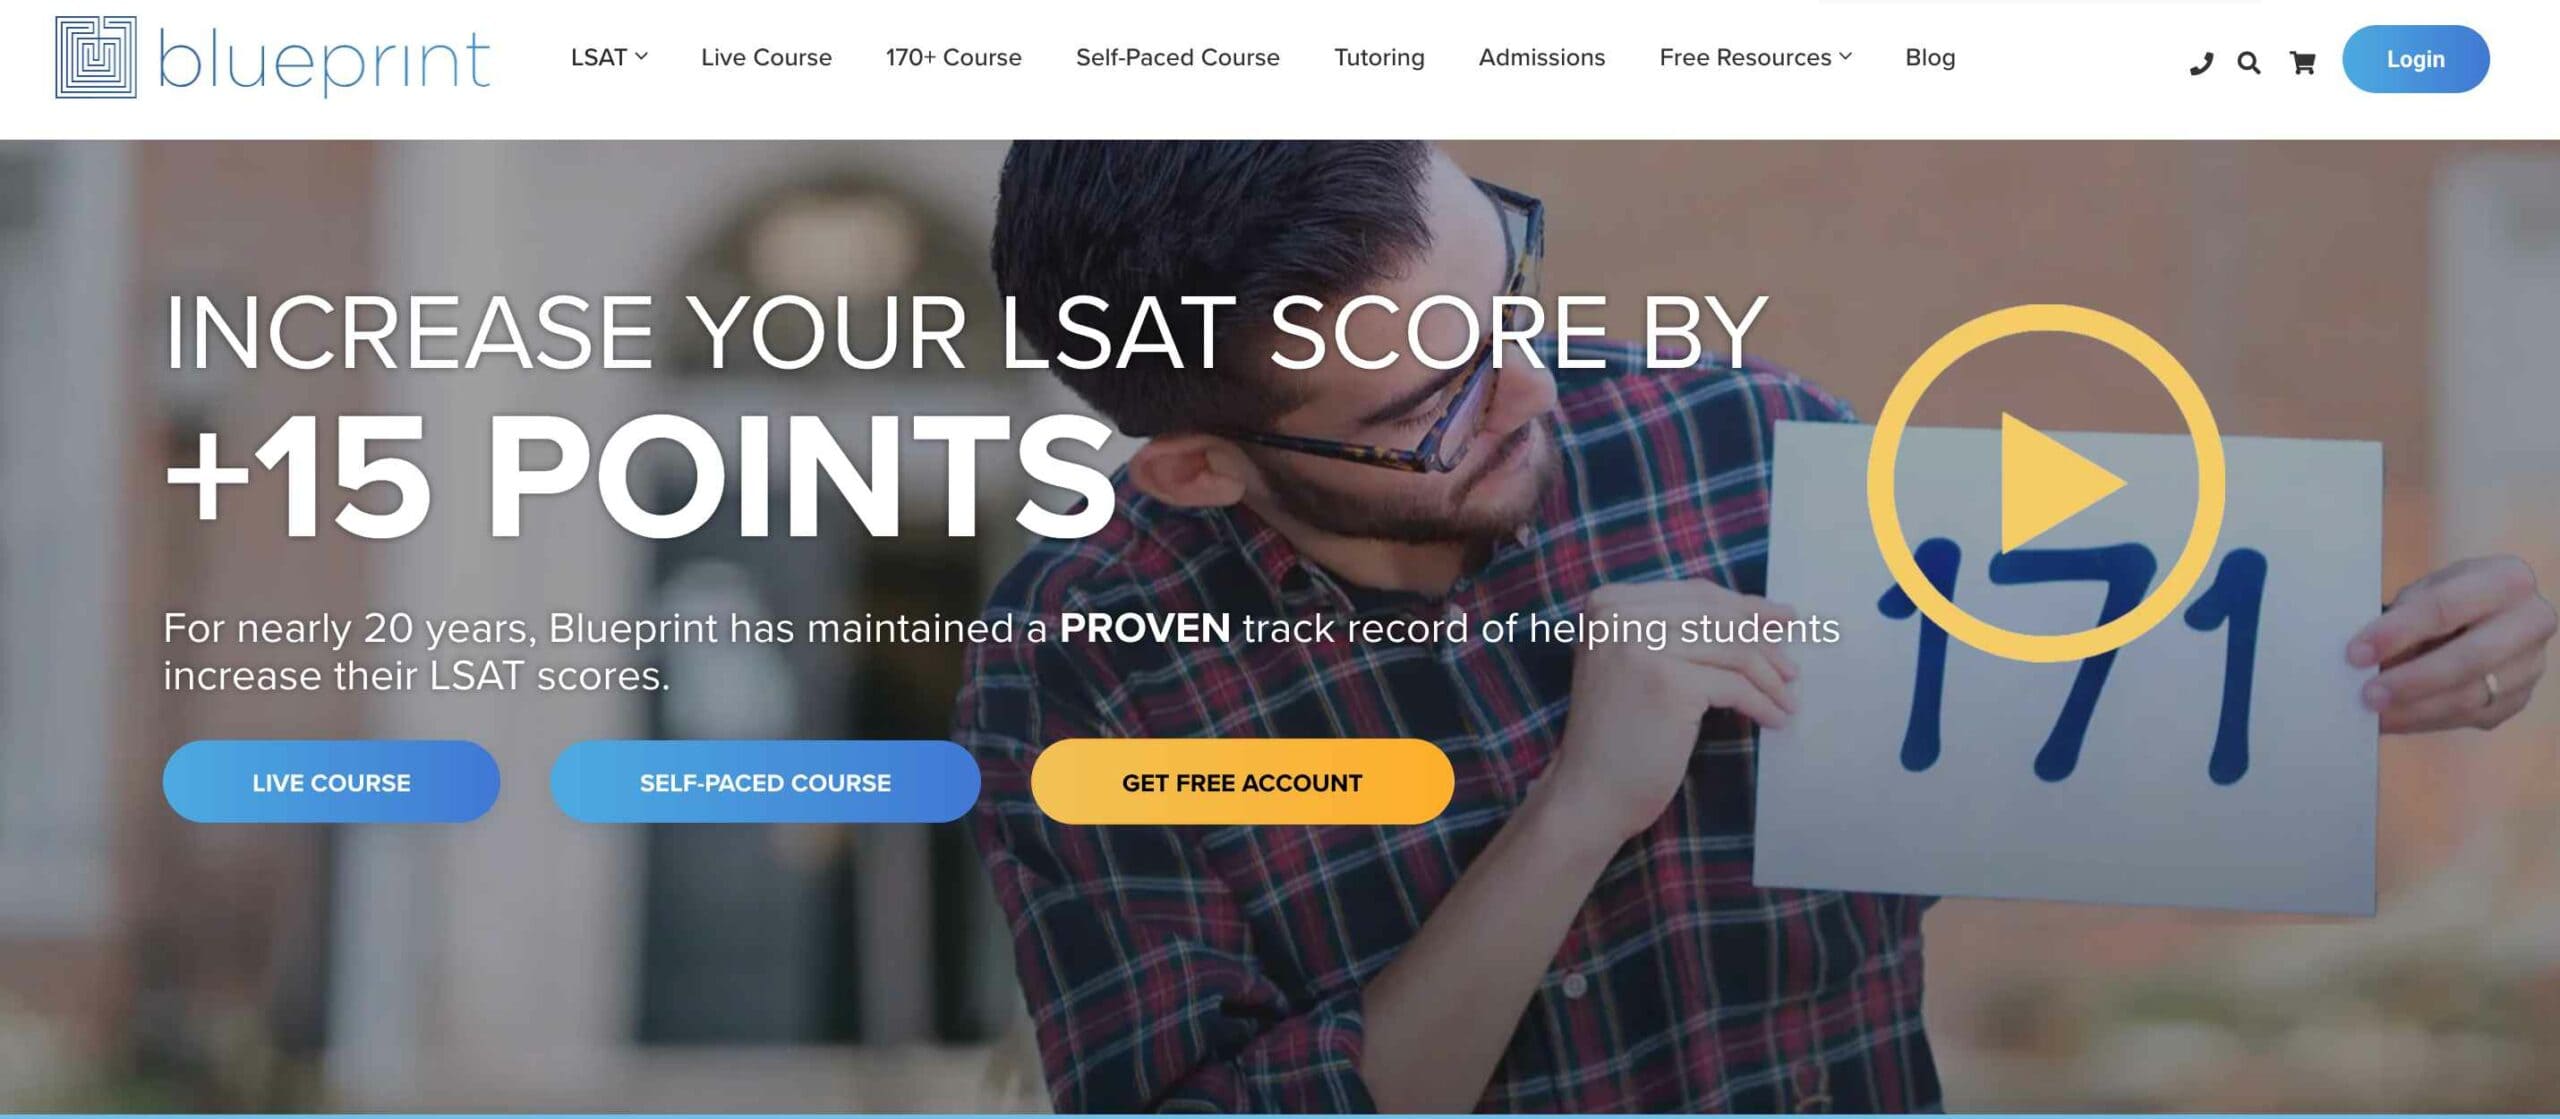 Go to the official website of Blueprint LSAT